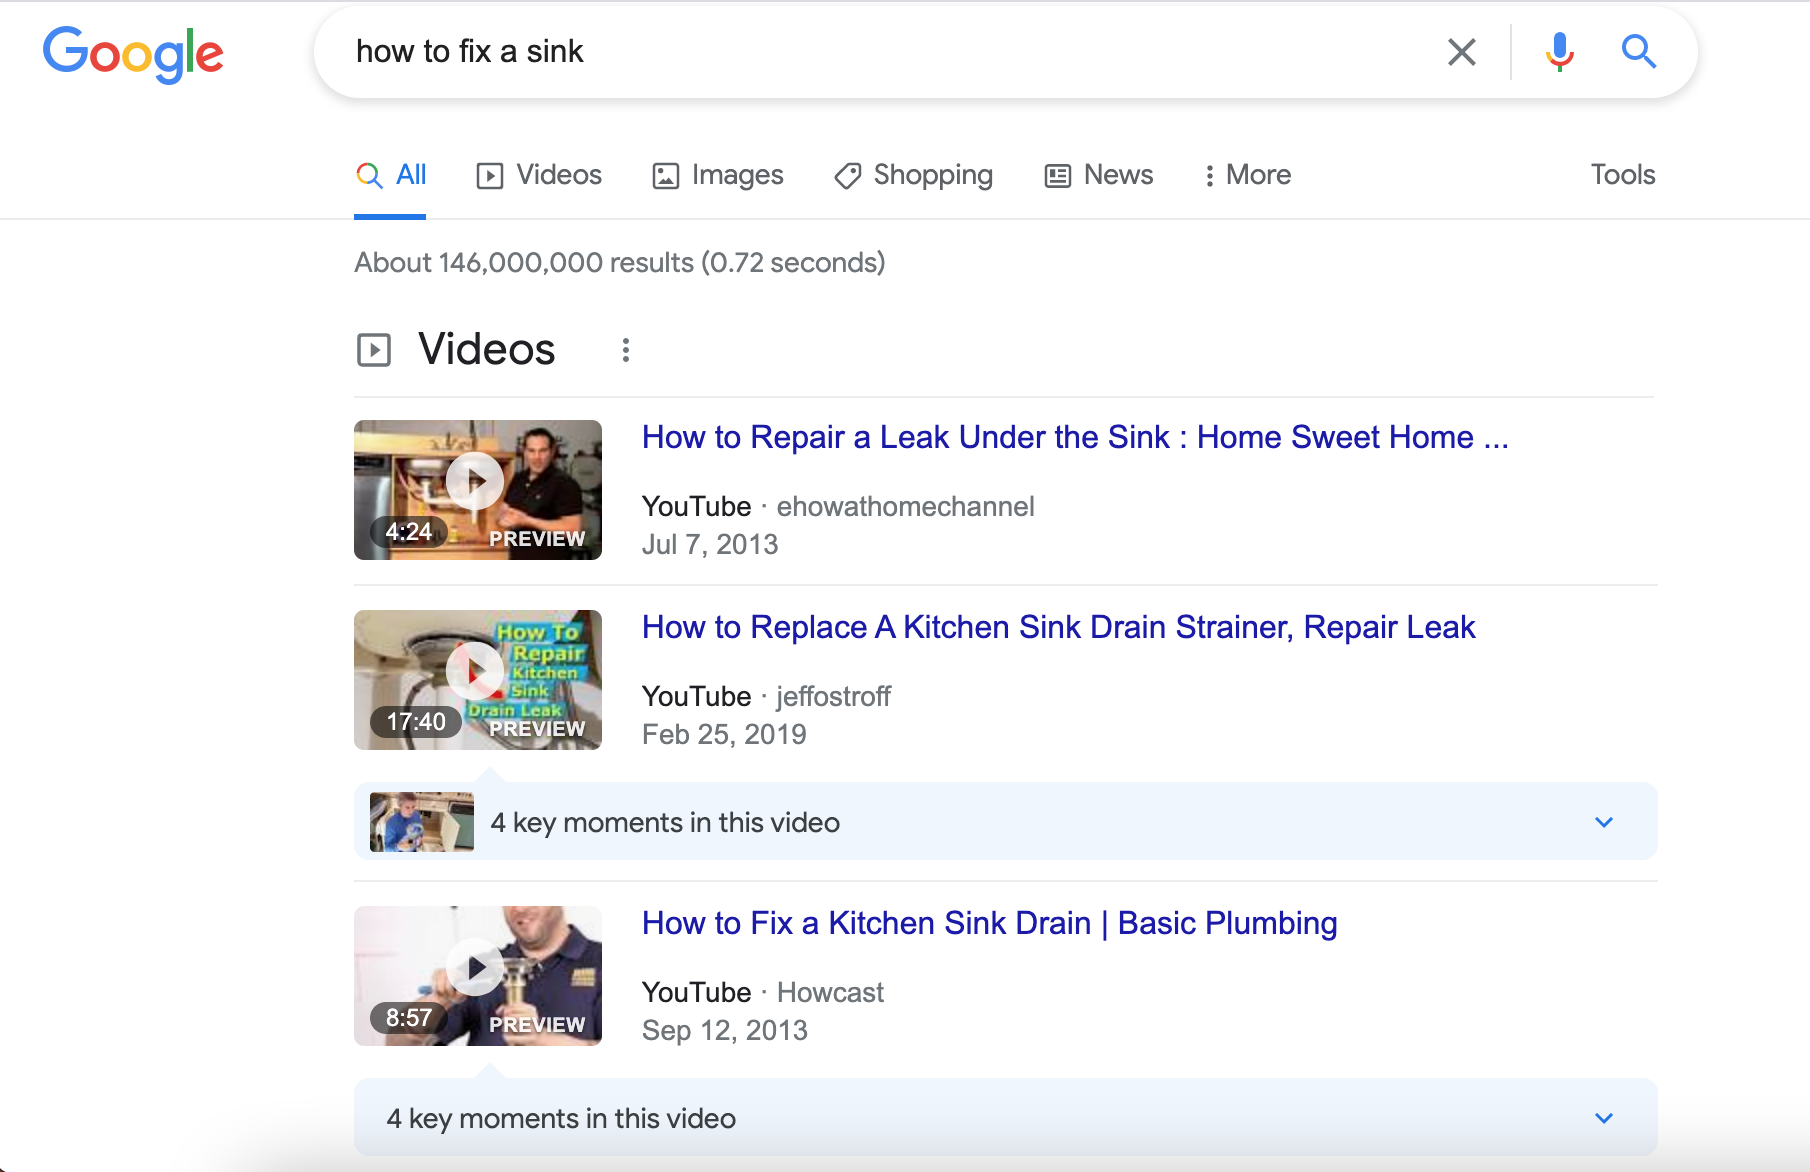 A screenshot of Google search results for how to fix a sink with video clips ranking at the top of the results